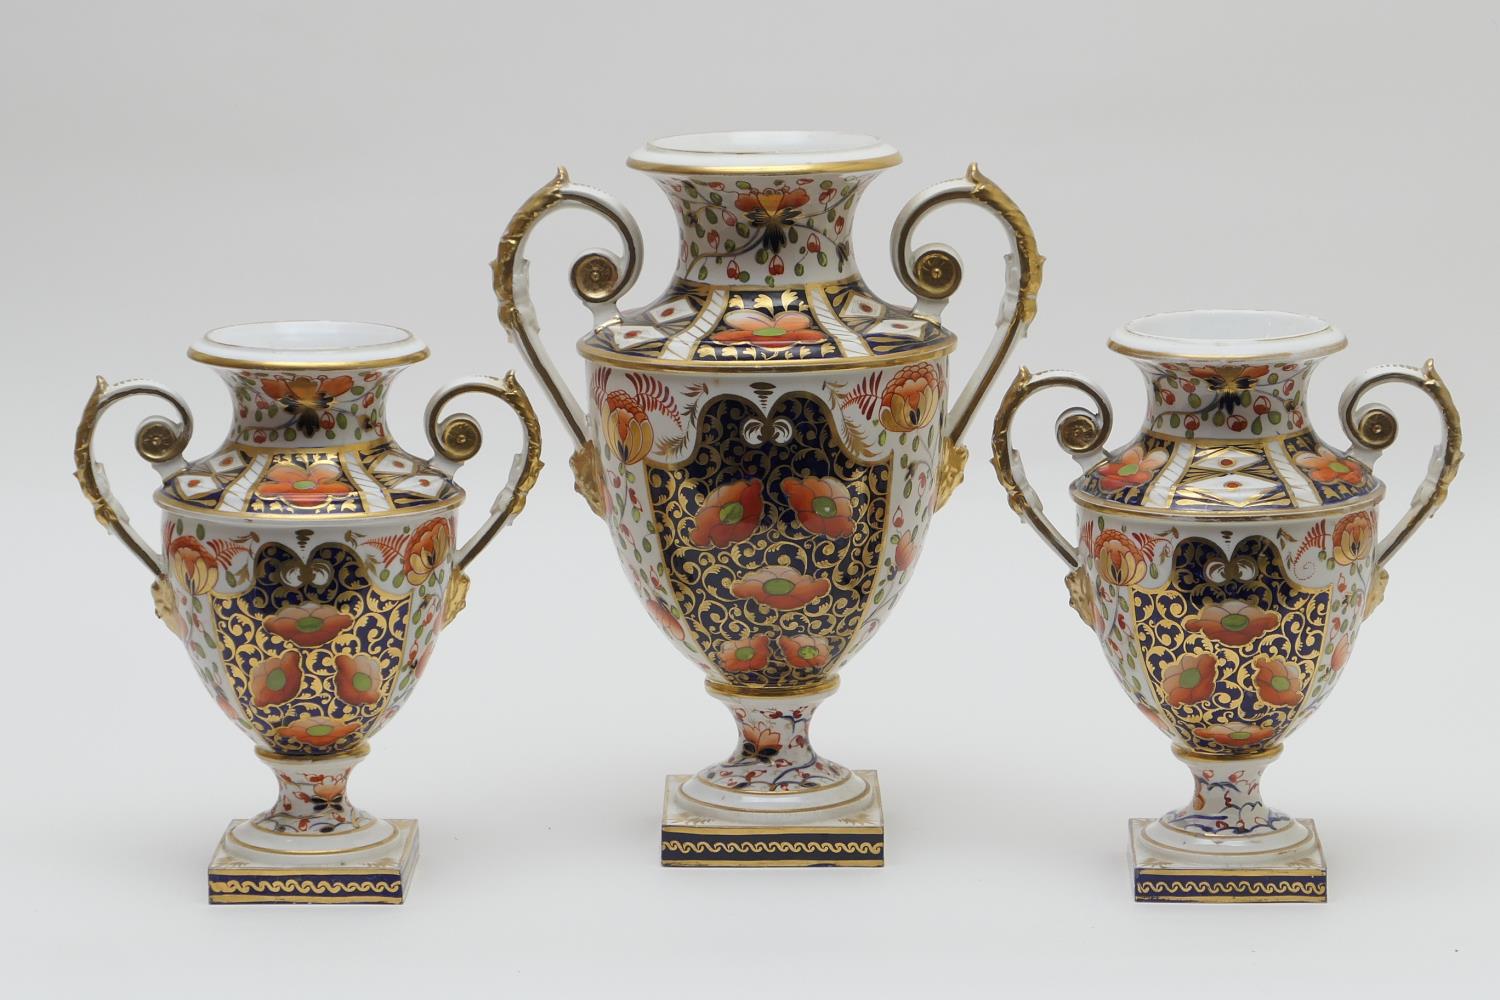 Derby imari porcelain garniture, circa 1800-25, each of twin handled urn shape, decorated in typical